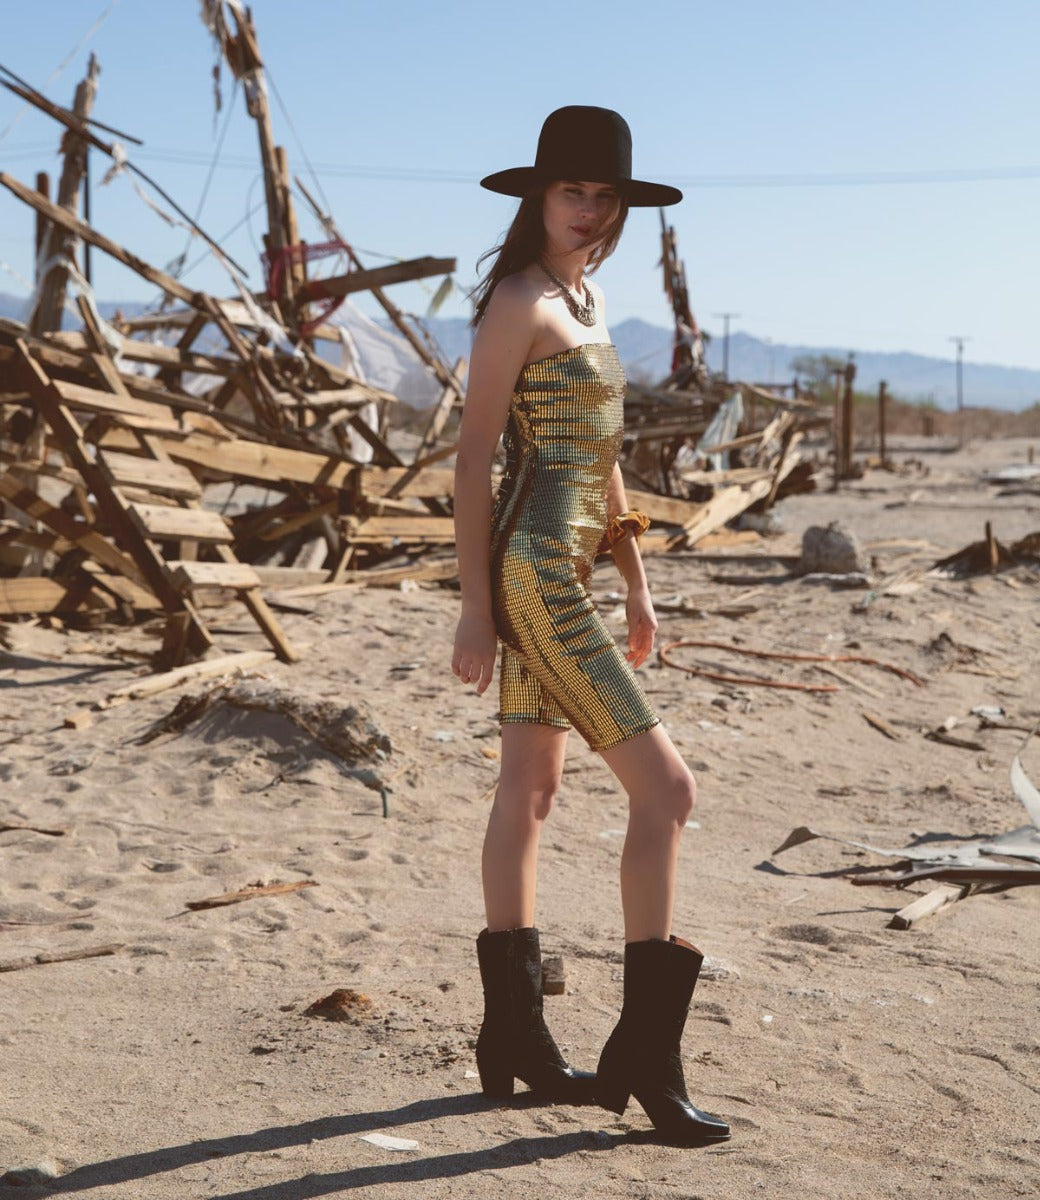 A woman in a Basanti dress, wearing Oak Tree Farms leather boots with pointed toe, standing in a deserted area.